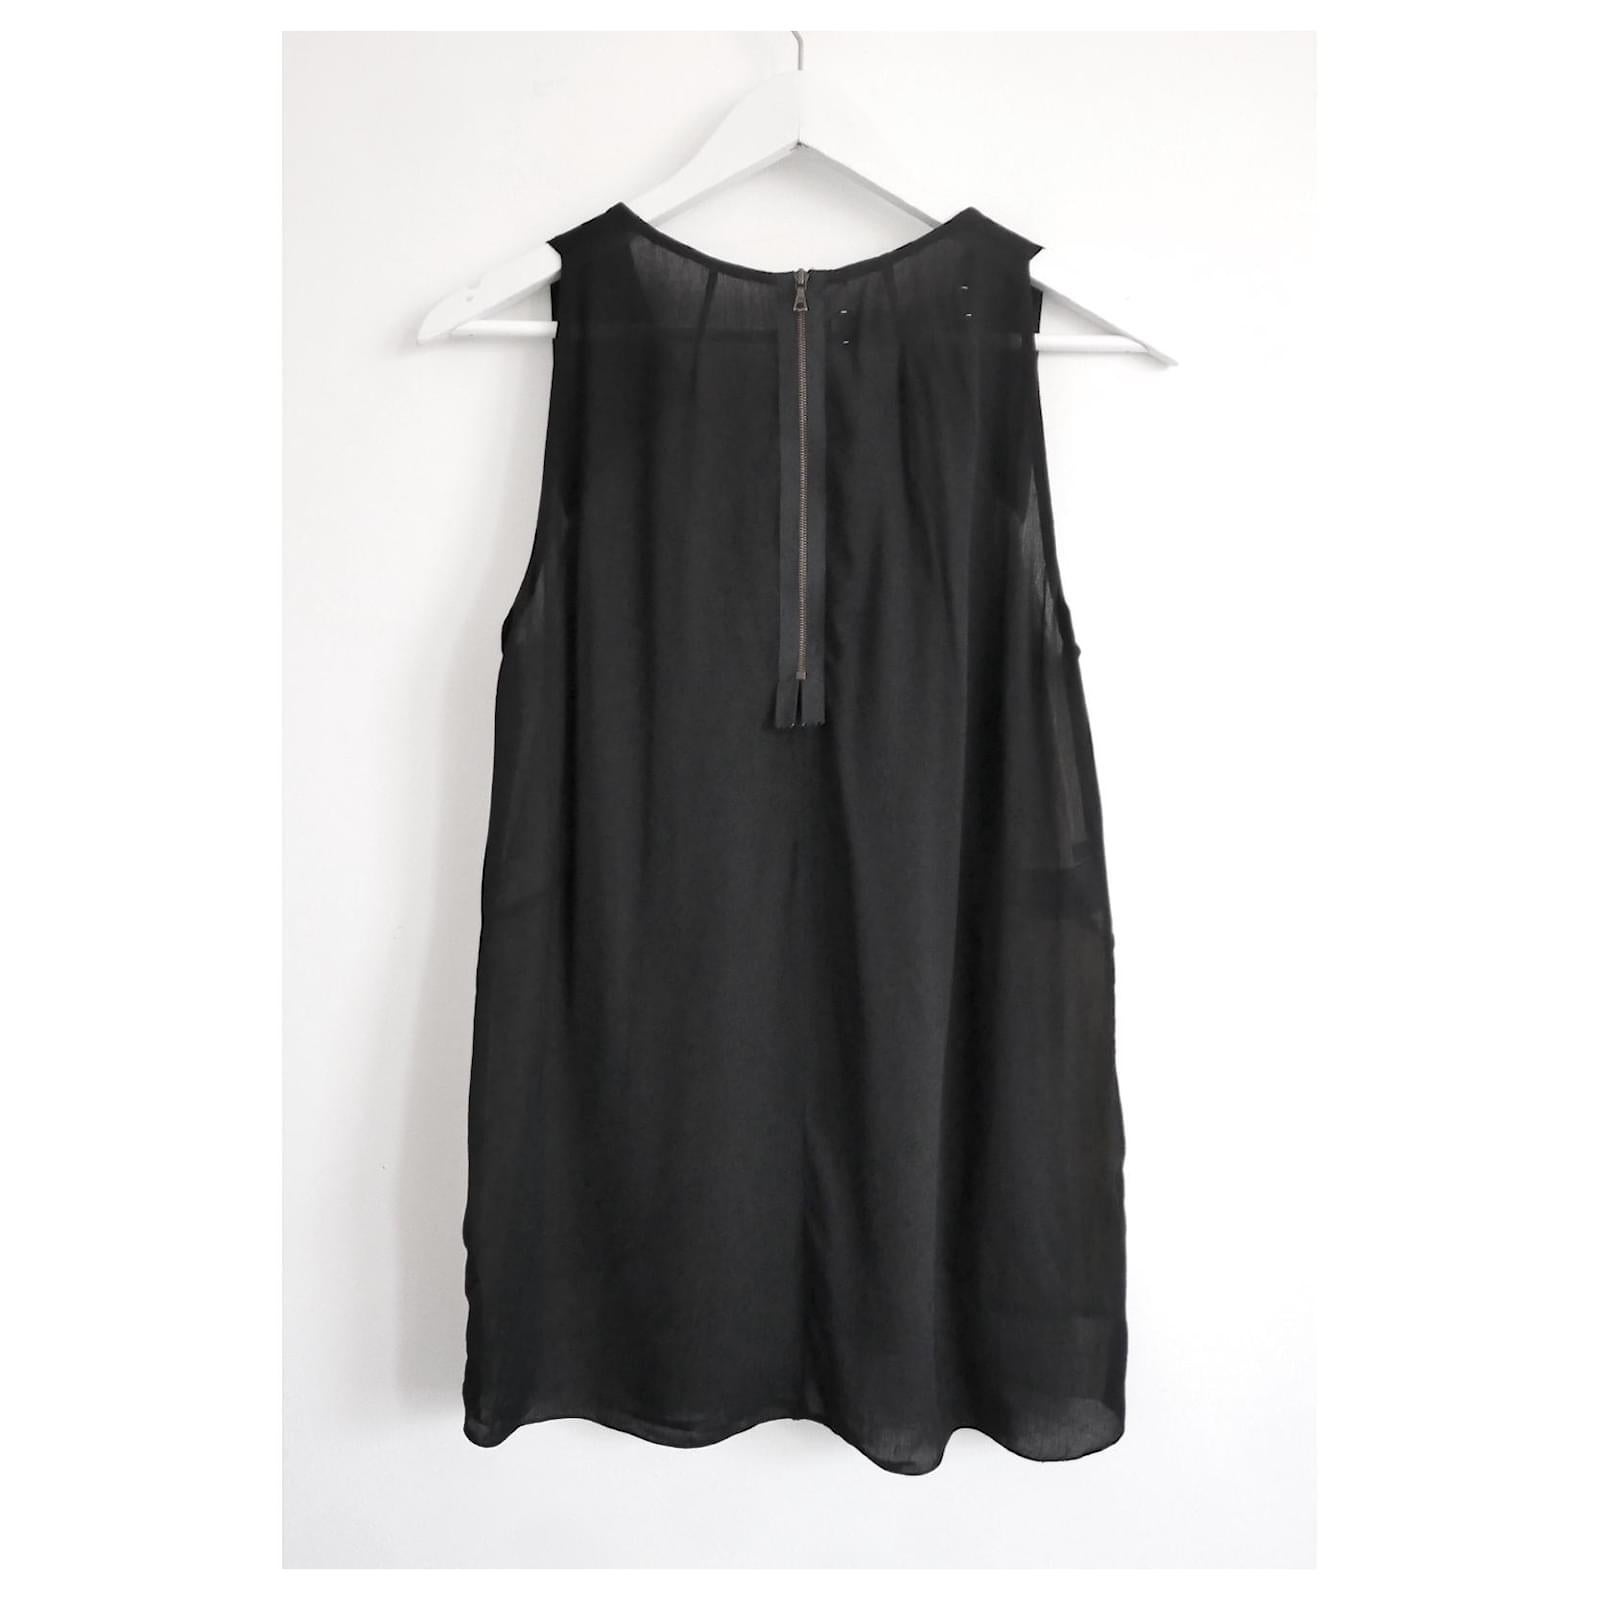 Marni Archival Panelled Frilled Top  In Excellent Condition For Sale In London, GB